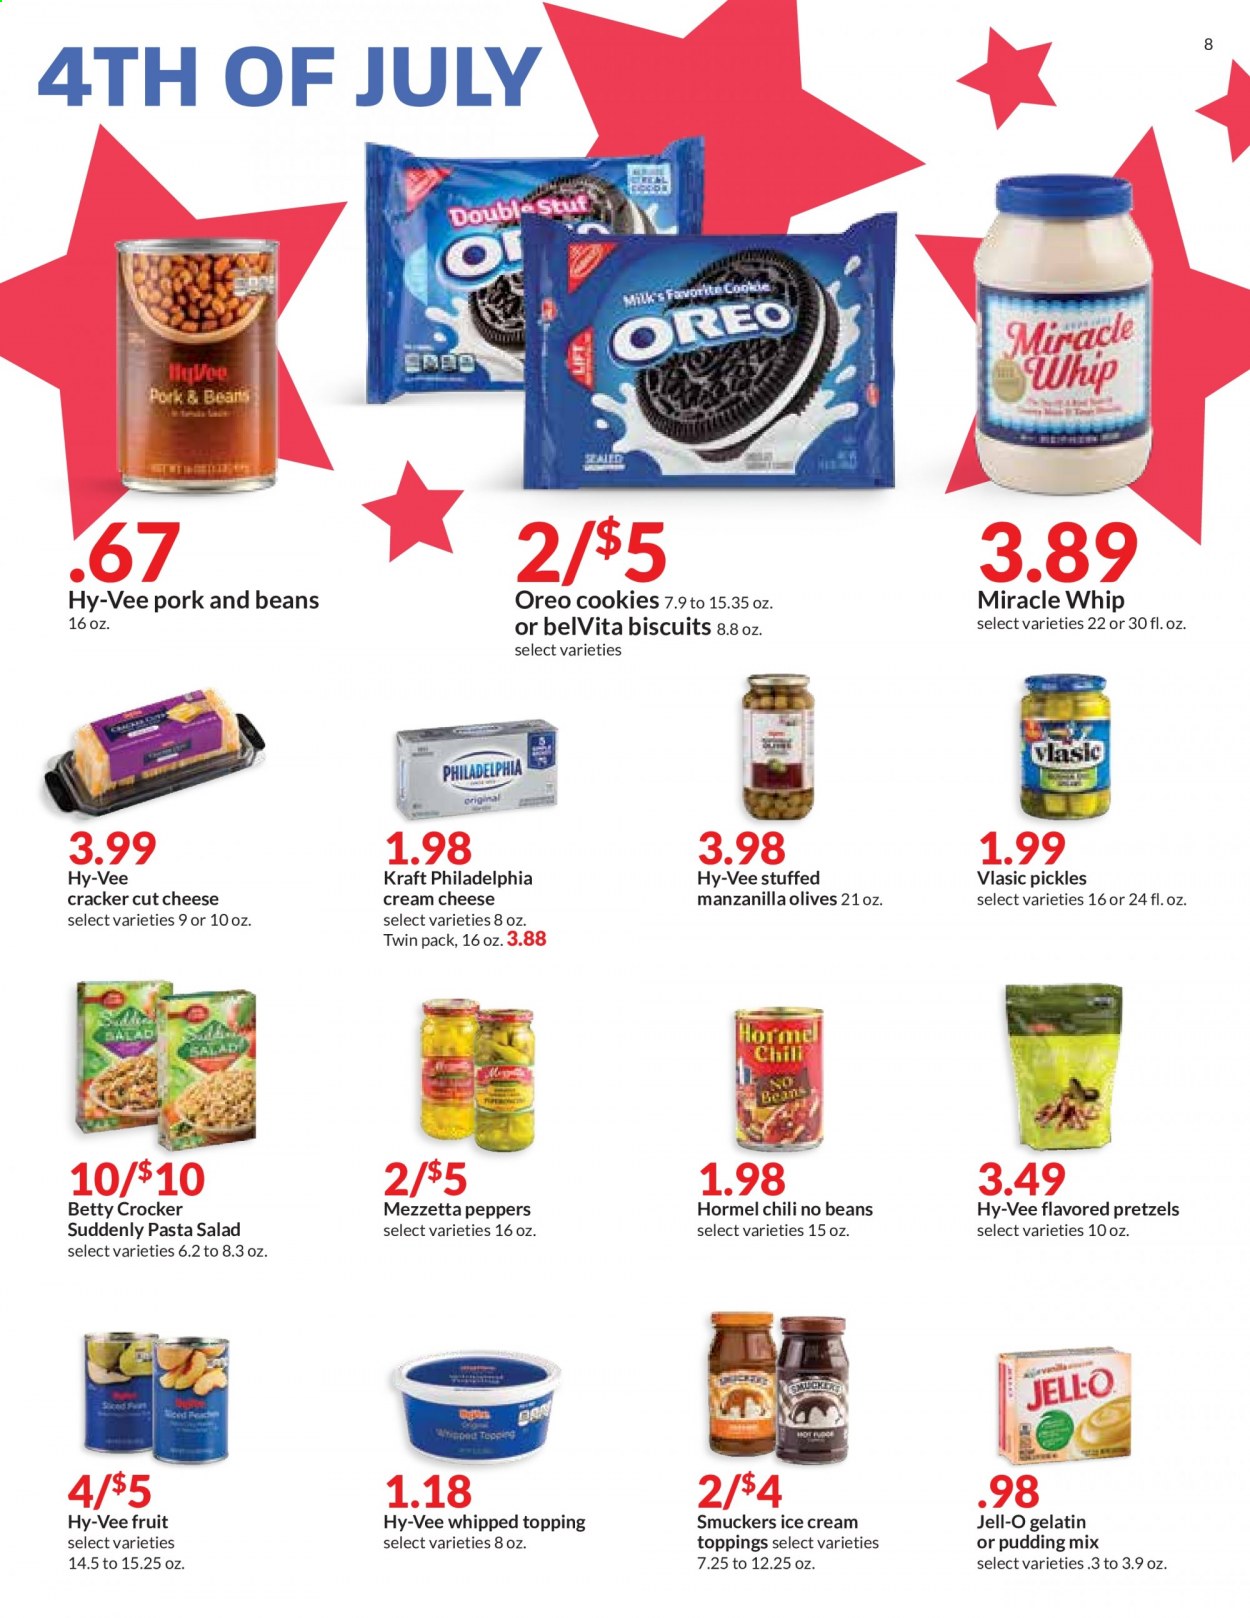 thumbnail - Hy-Vee Flyer - 06/30/2021 - 07/06/2021 - Sales products - pretzels, beans, salad, peppers, pasta, Kraft®, Hormel, pasta salad, Philadelphia, cheese, pudding, Oreo, Miracle Whip, ice cream, cookies, crackers, biscuit, topping, Jell-O, pickles, olives, belVita. Page 8.